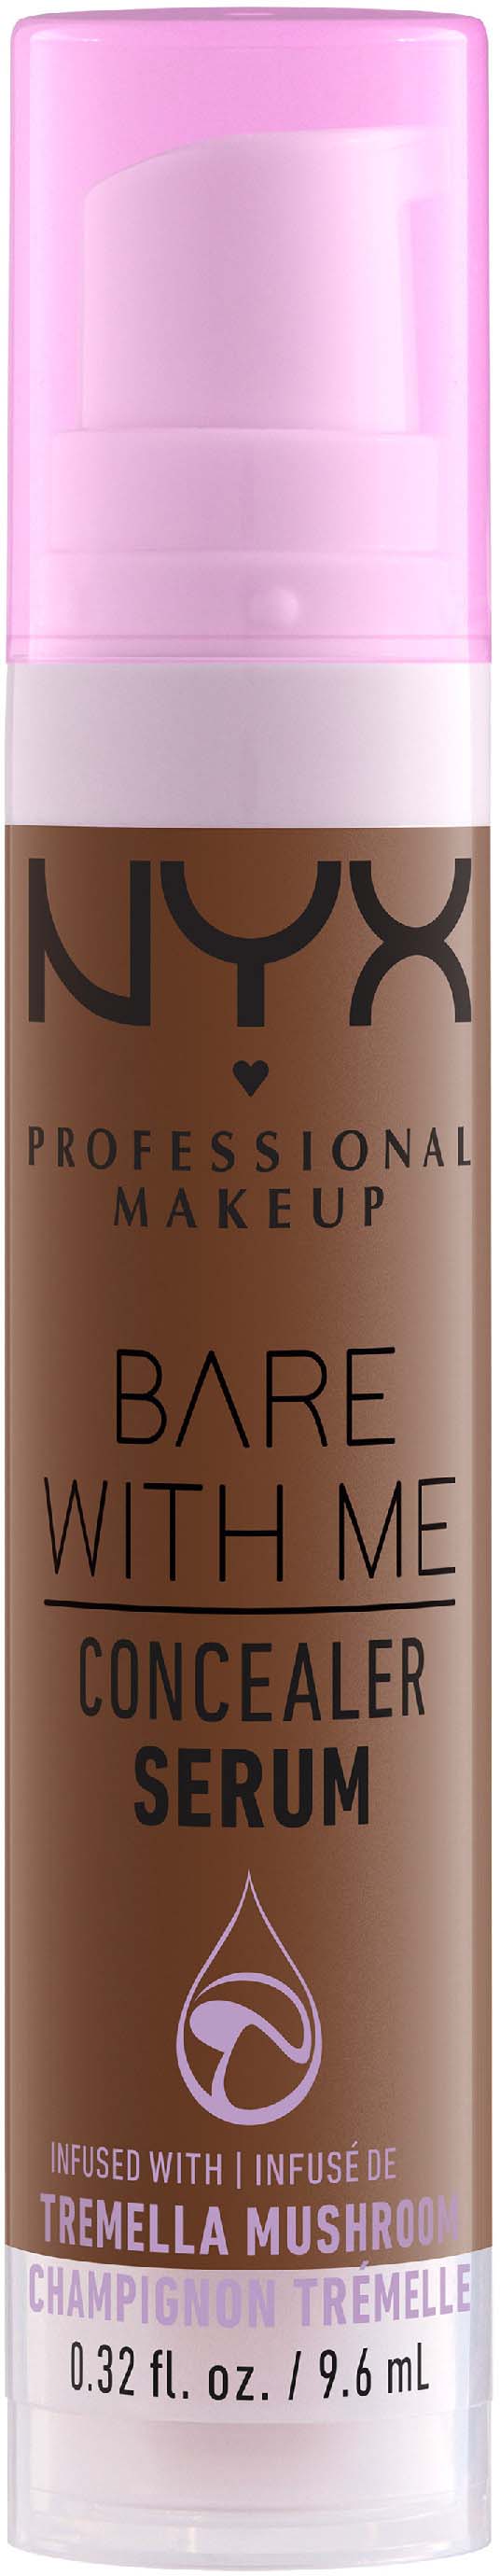 Concealer Me Serum NYX Rich MAKEUP PROFESSIONAL Bare With